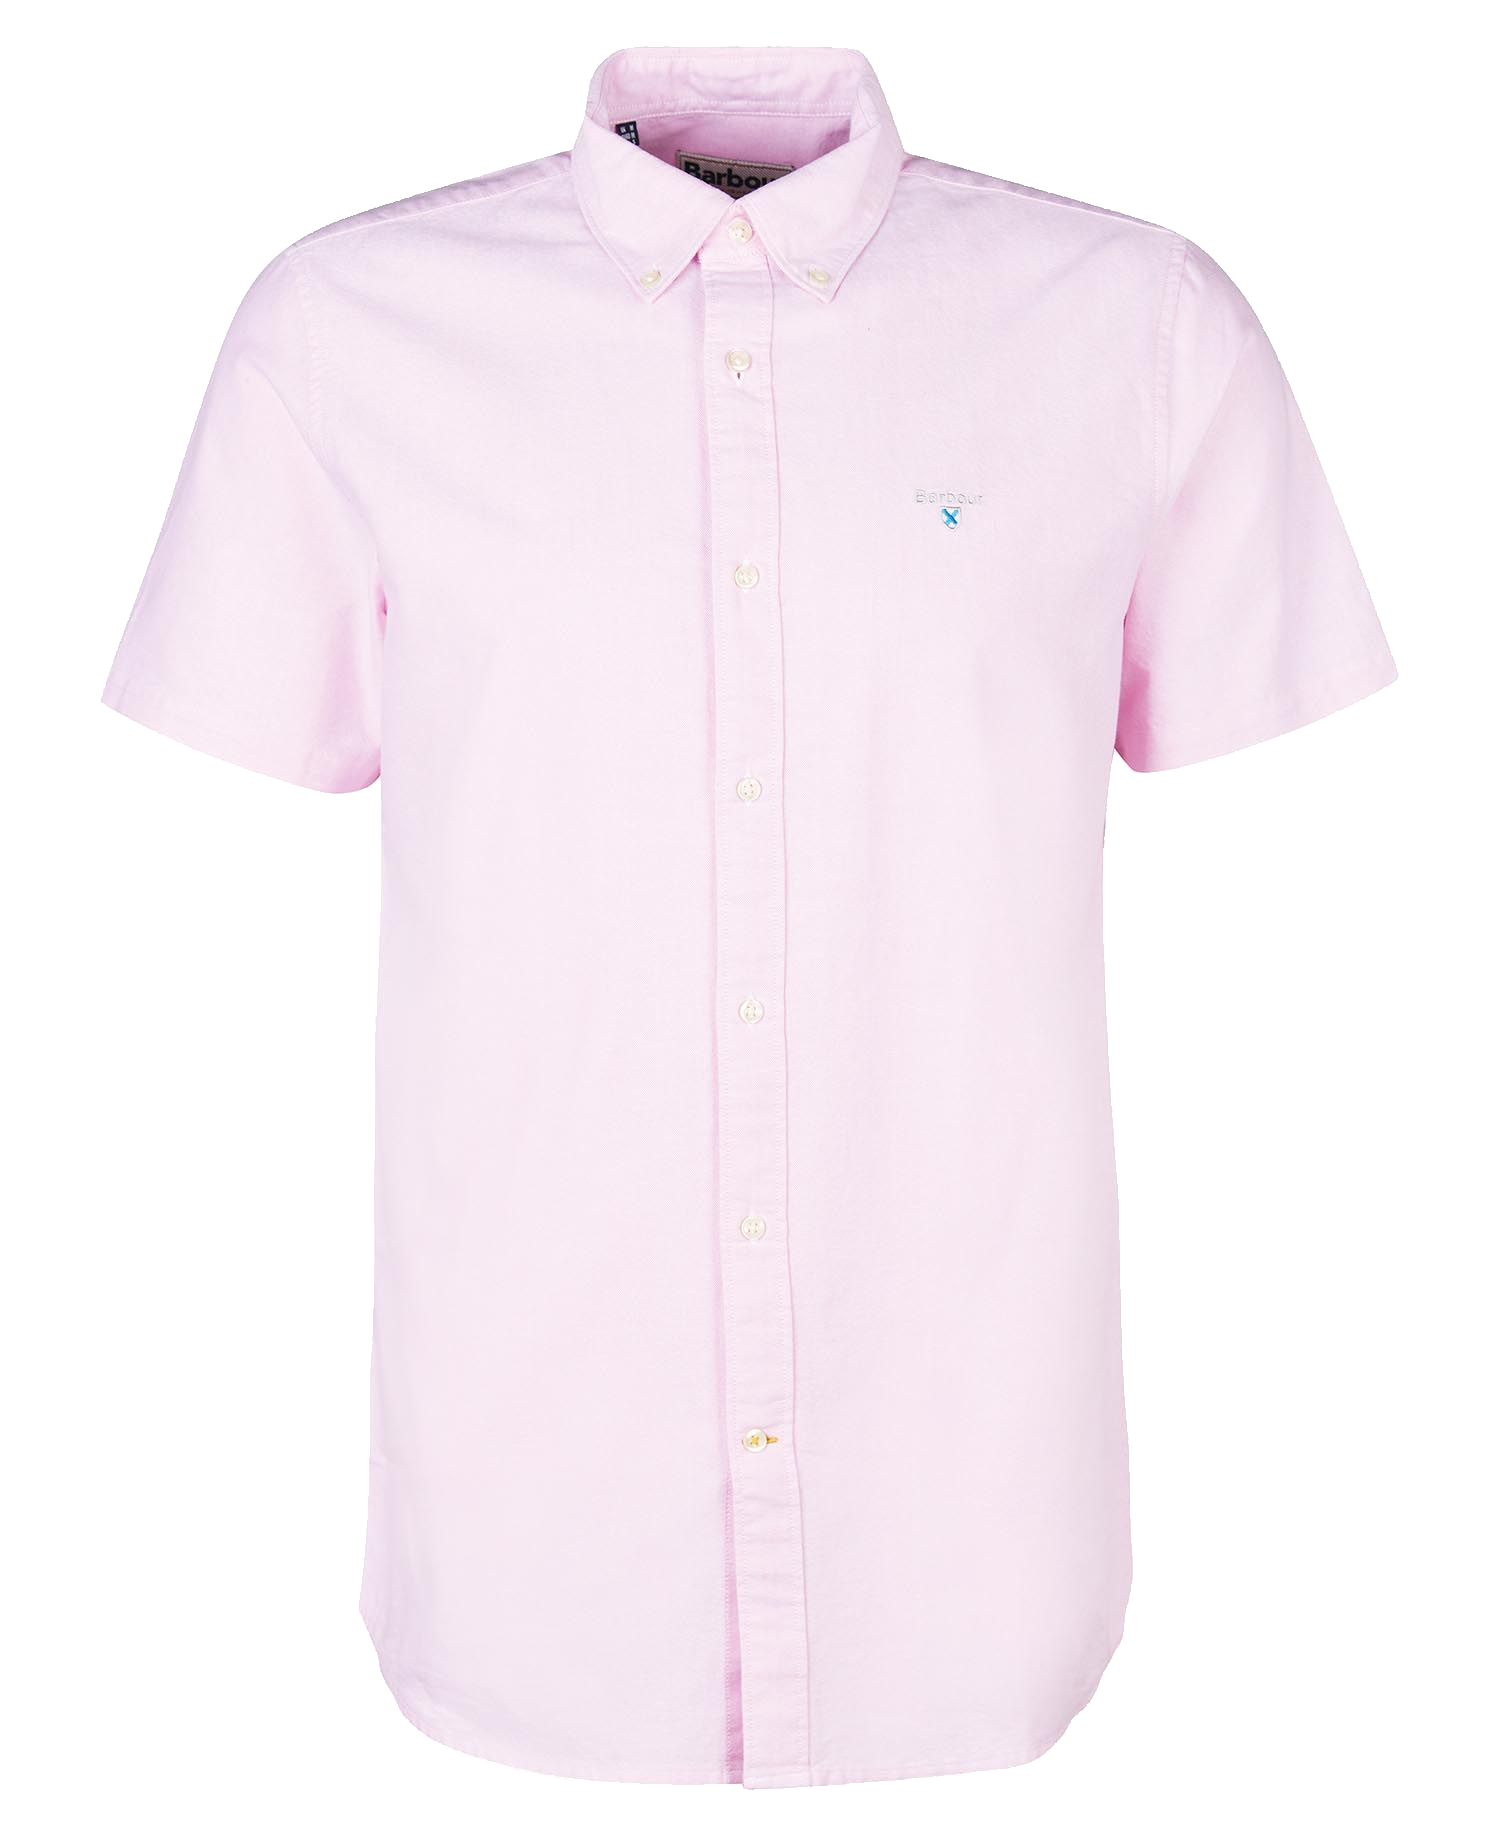 Barbour Barbour Oxford Short Sleeve Tailored Shirt Pink